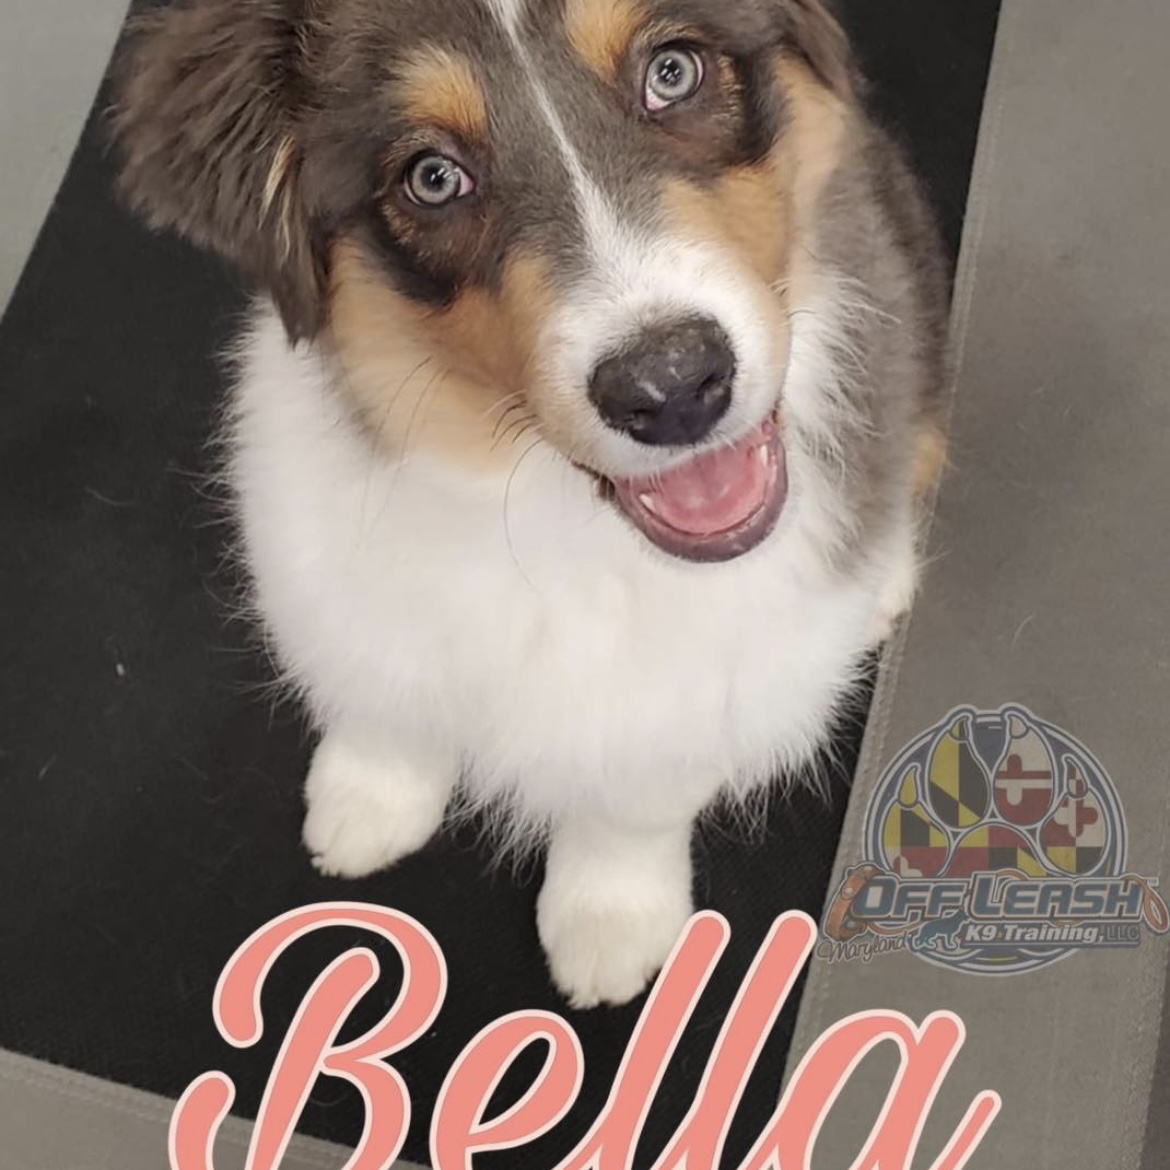 Puppy named Bella who enrolled in one of our puppy training packages